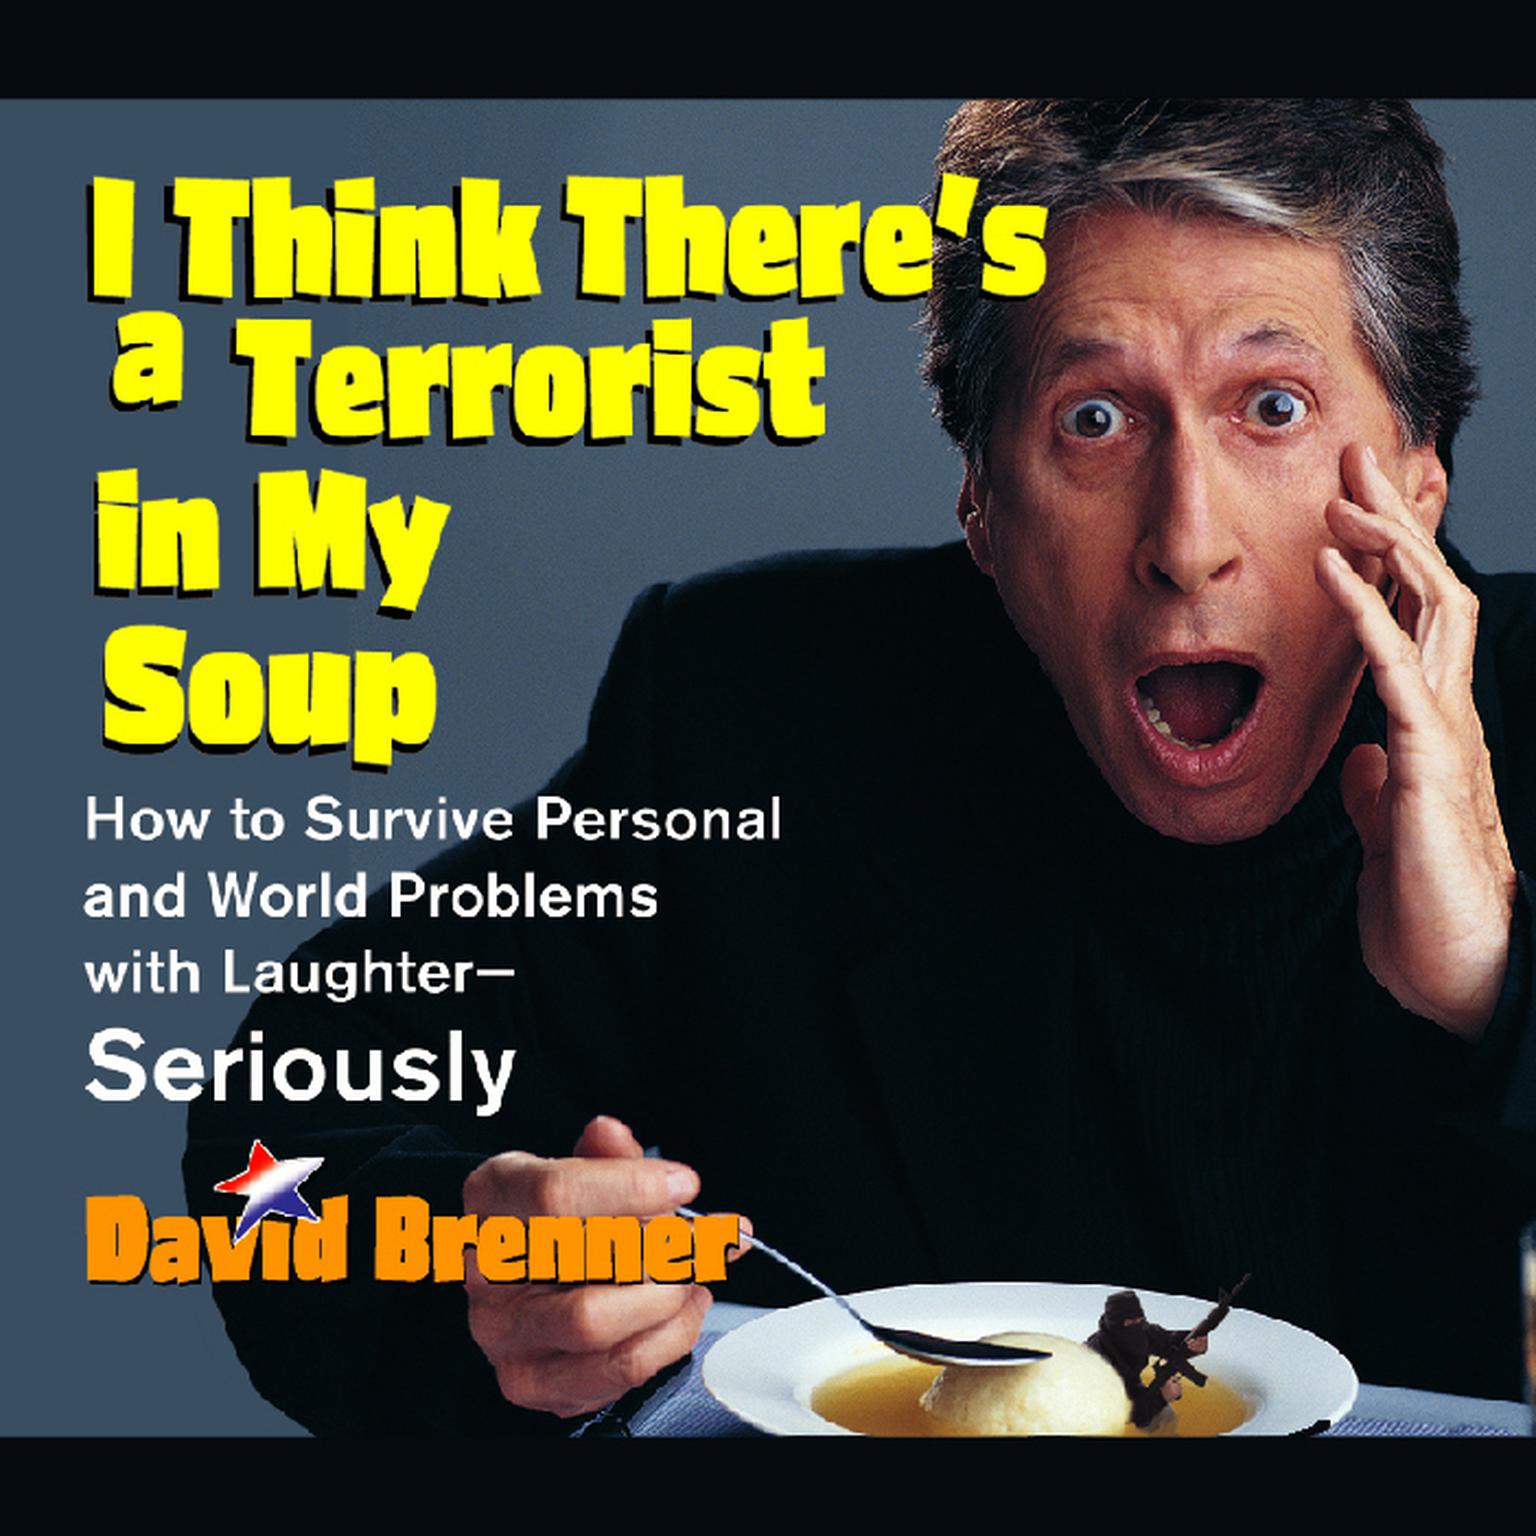 I Think Theres a Terrorist in My Soup (Abridged): How to Survive Personal and World Problems with Laughter-Seriously Audiobook, by David Brenner